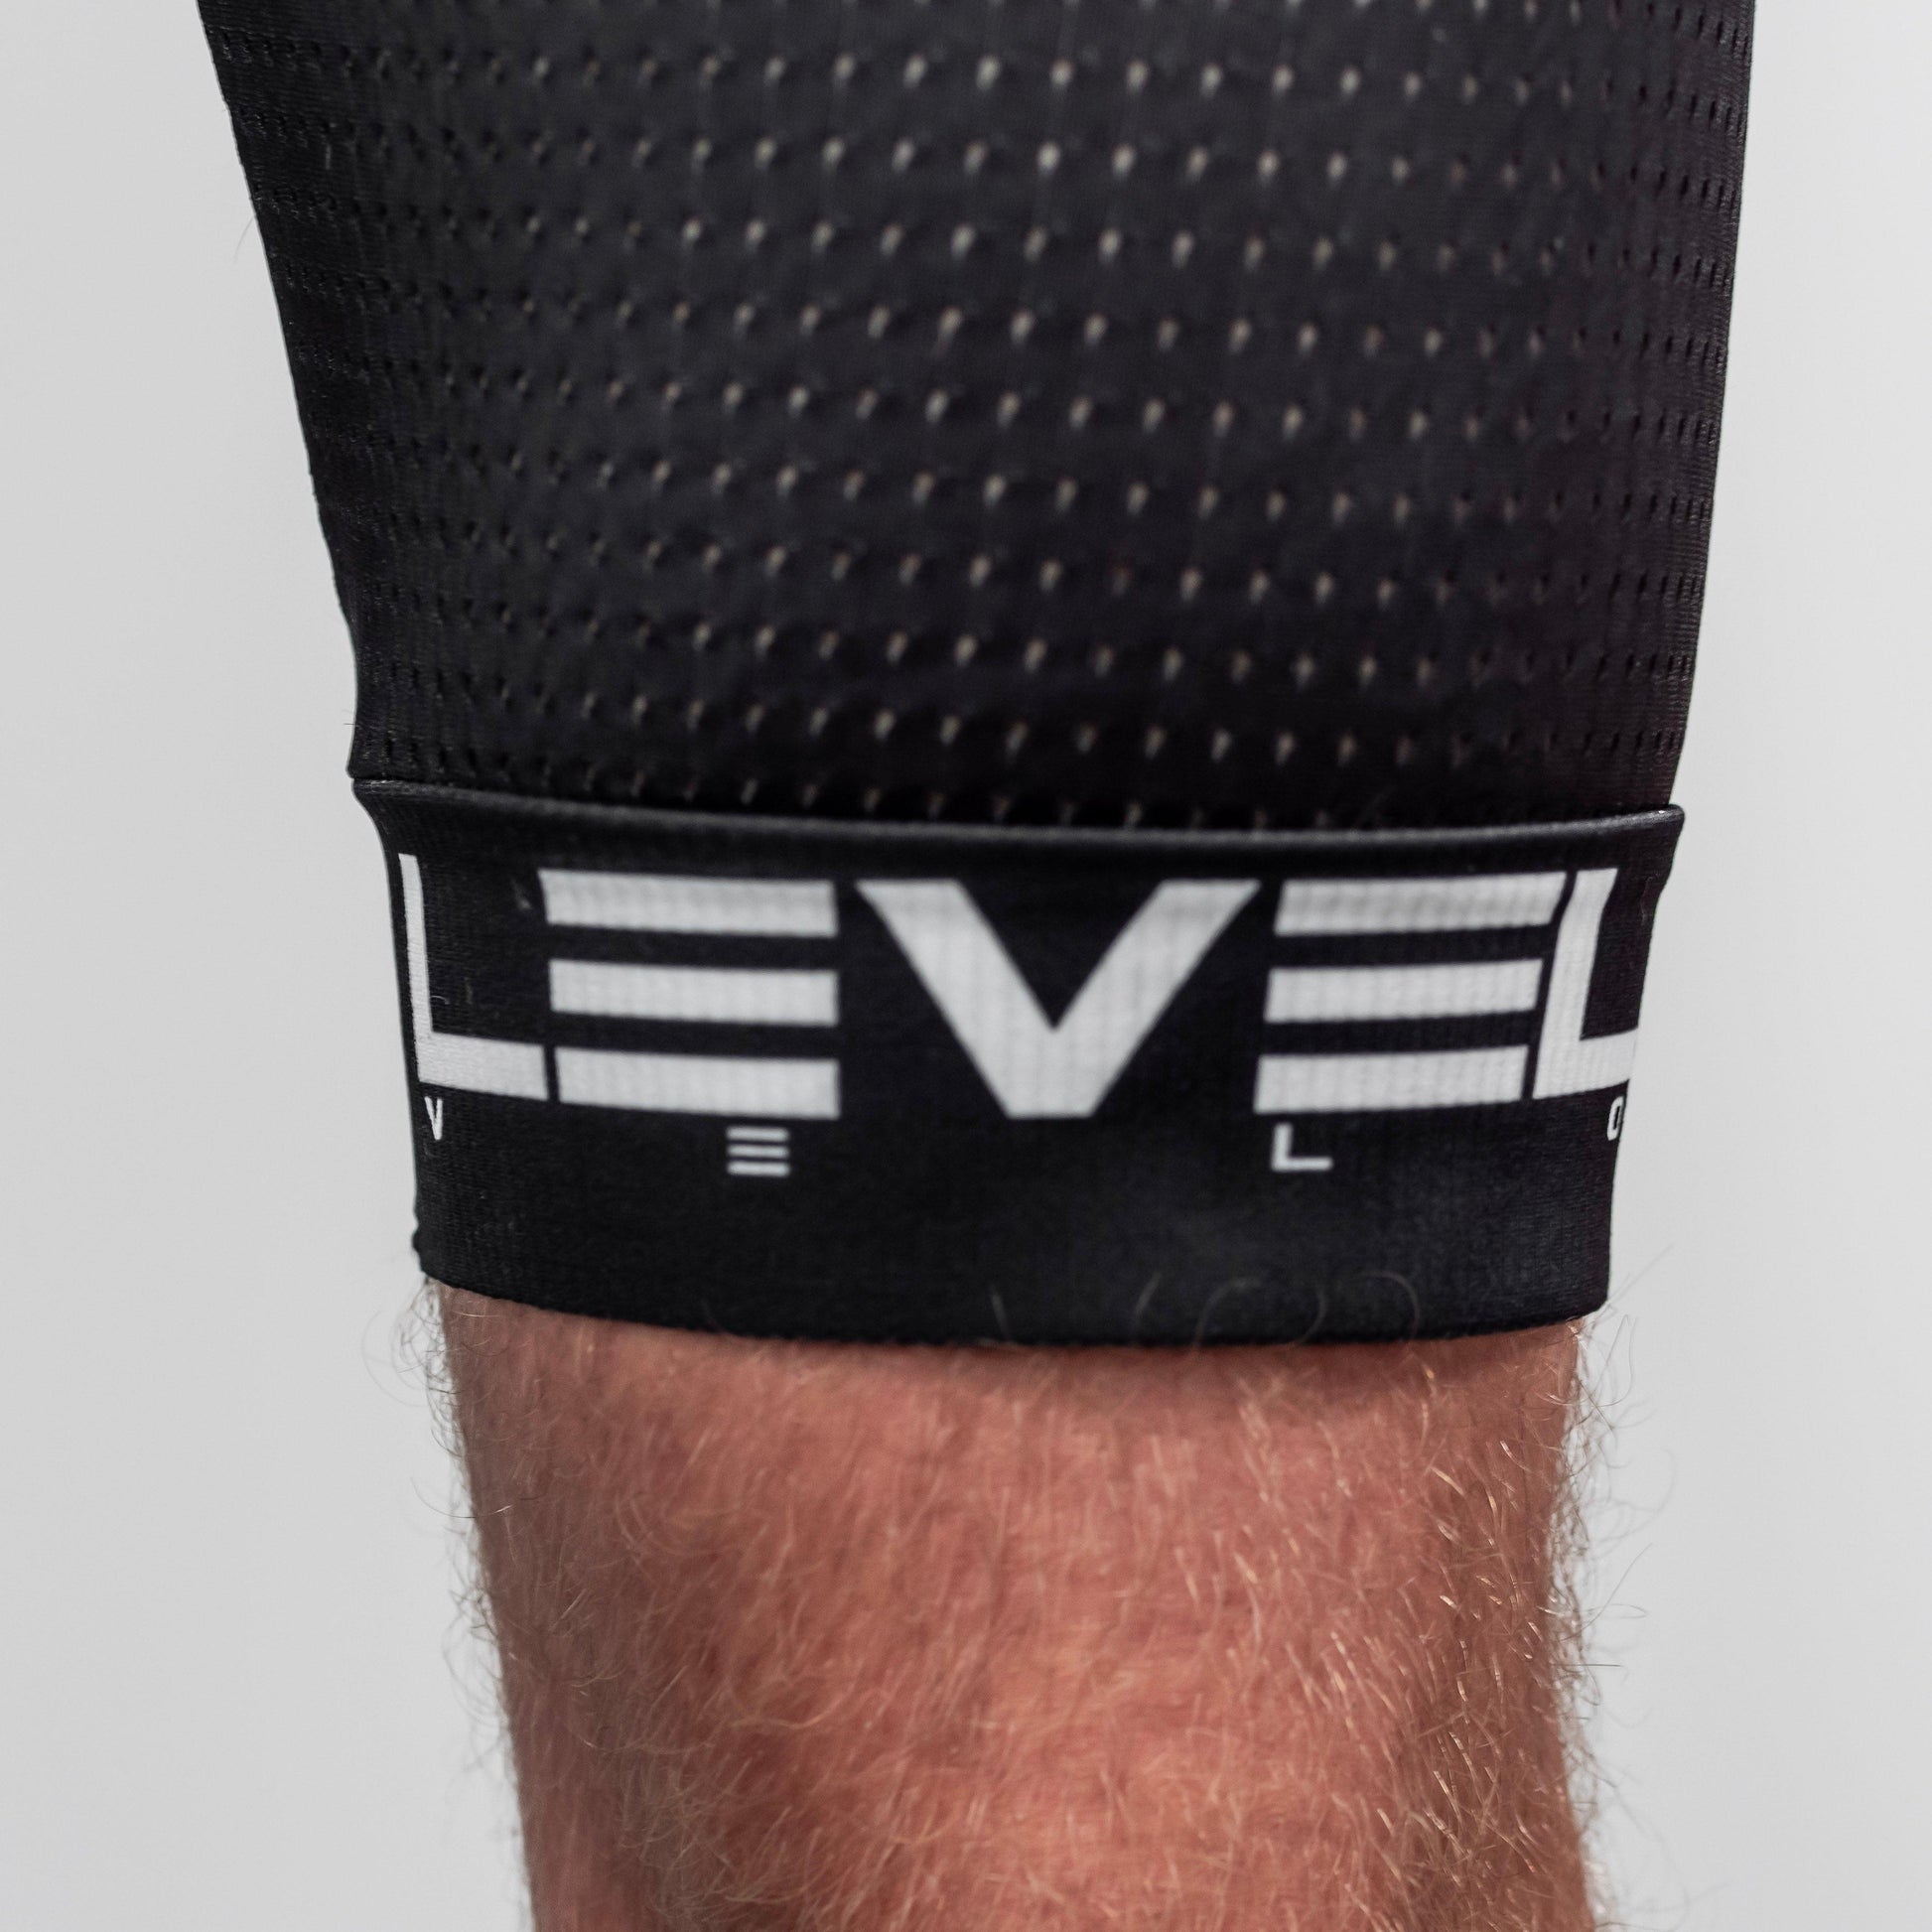 Synergy Indoor Cycling Shorts MENS - LEVEL VELO